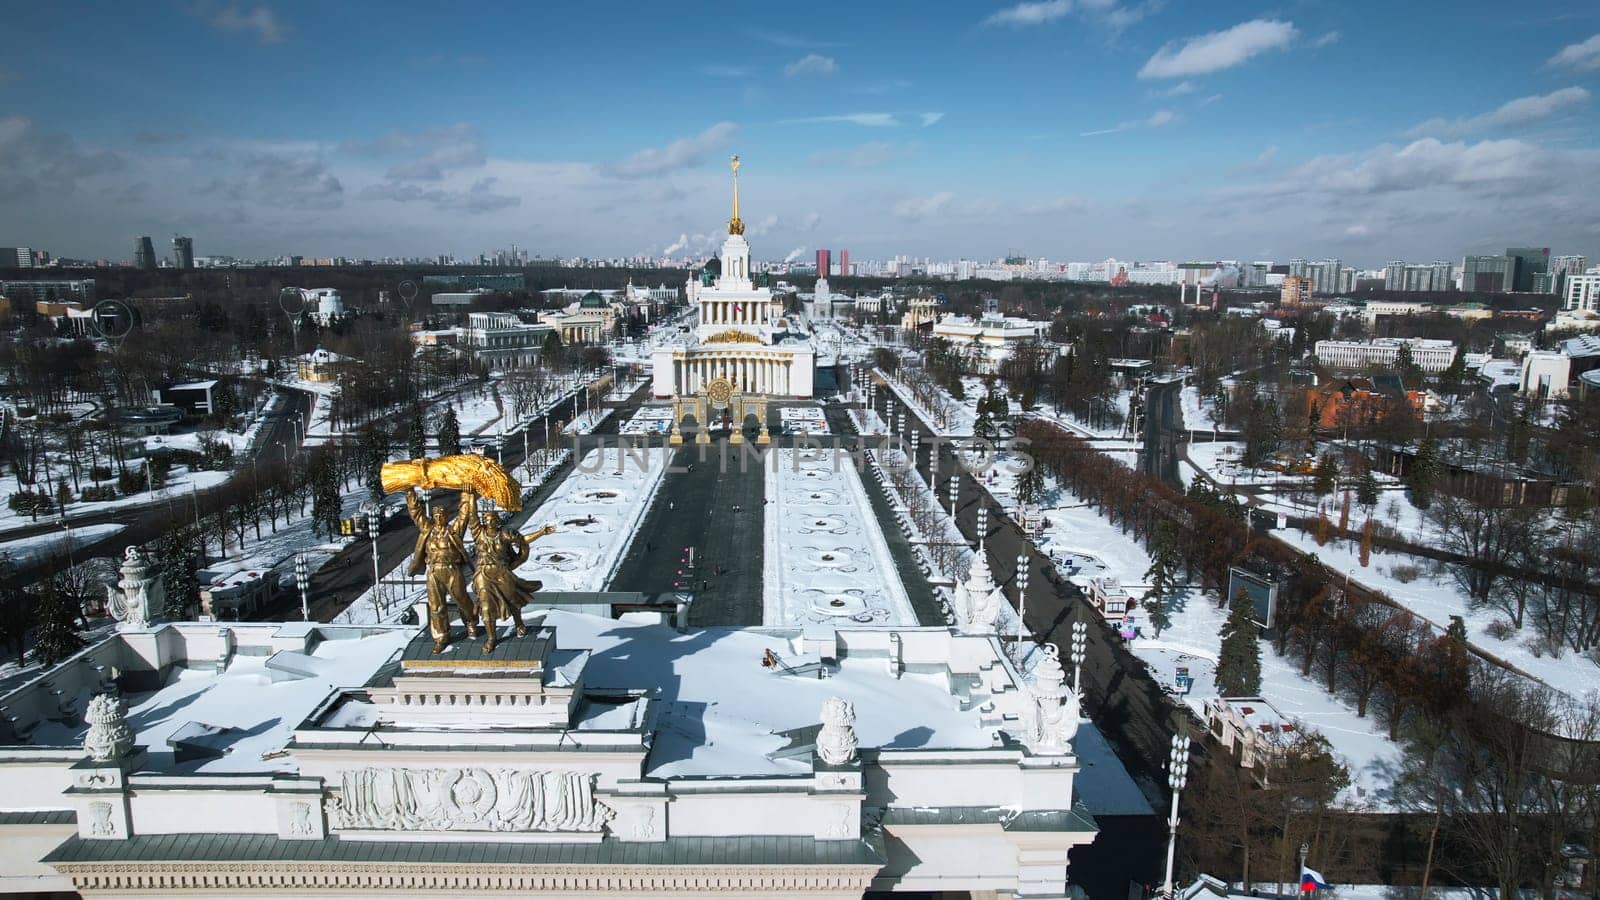 Top view of historic Soviet Square in winter. Creative. Historical buildings with monuments and arches in city center. Winter cityscape with historical center and square by Mediawhalestock